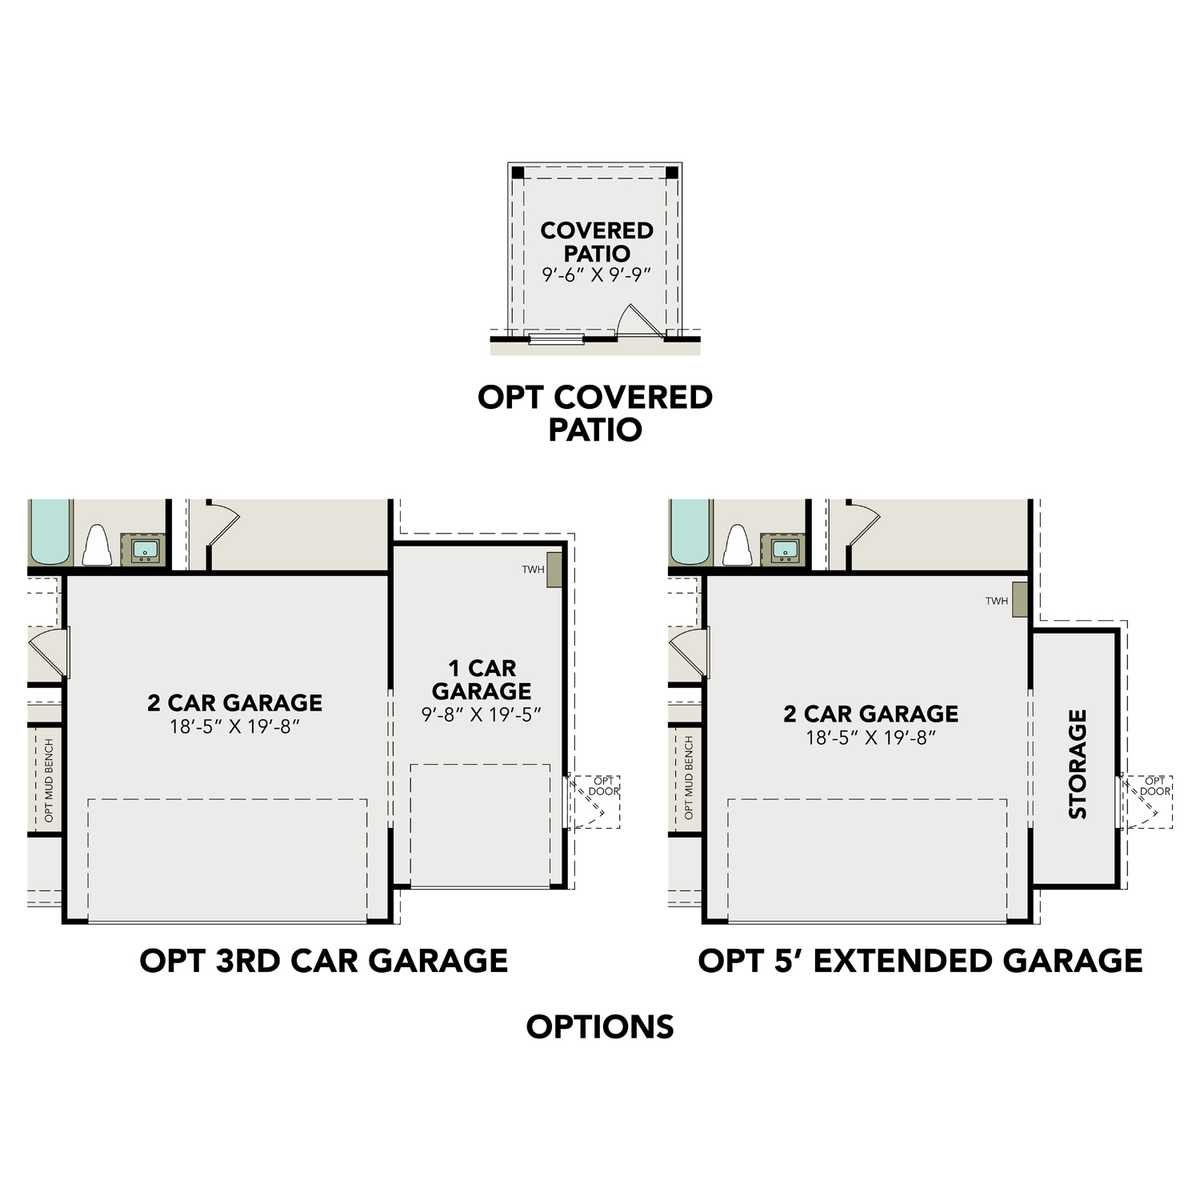 2 - The Frio E buildable floor plan layout in Davidson Homes' Applewhite Meadows community.